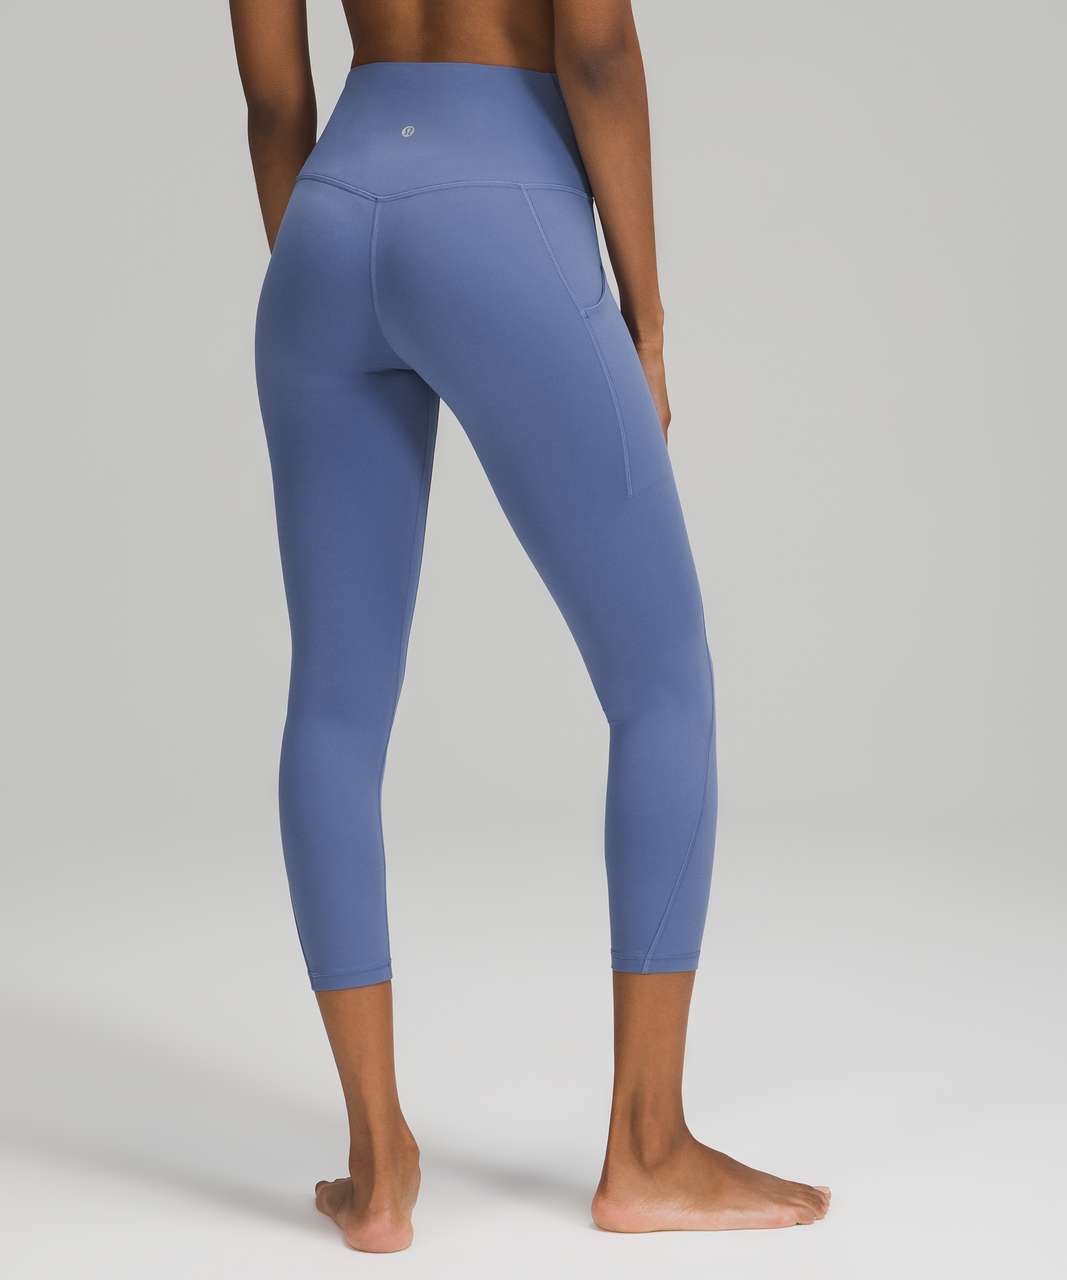 Lululemon Align High Rise Crop with Pockets 23" - Water Drop